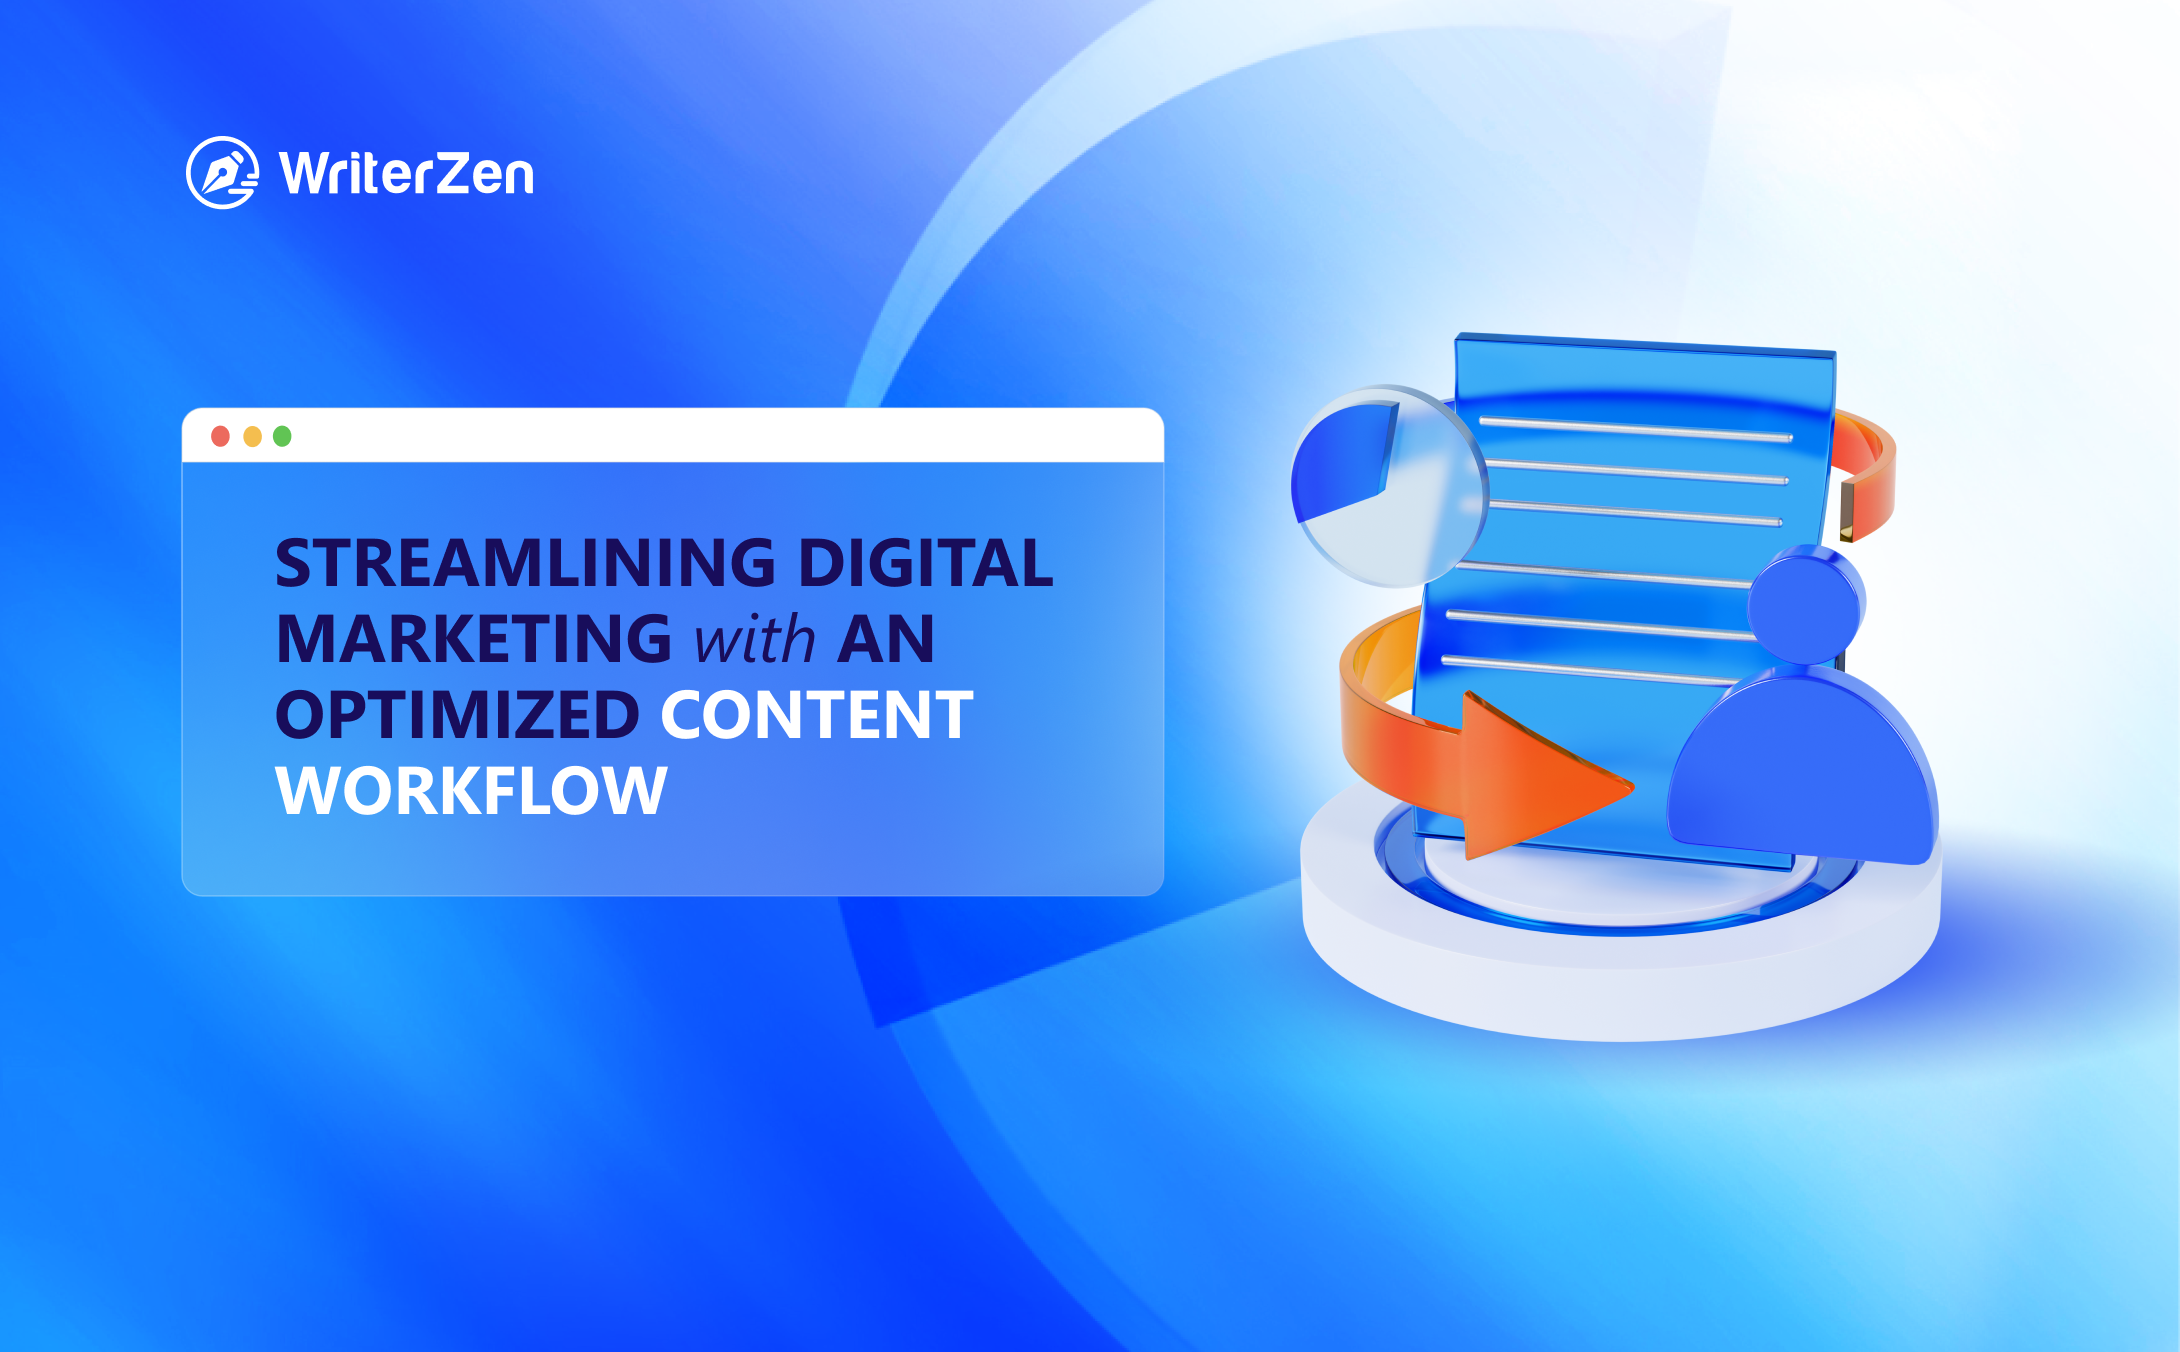 Streamlining Digital Marketing with an Optimized Content Workflow